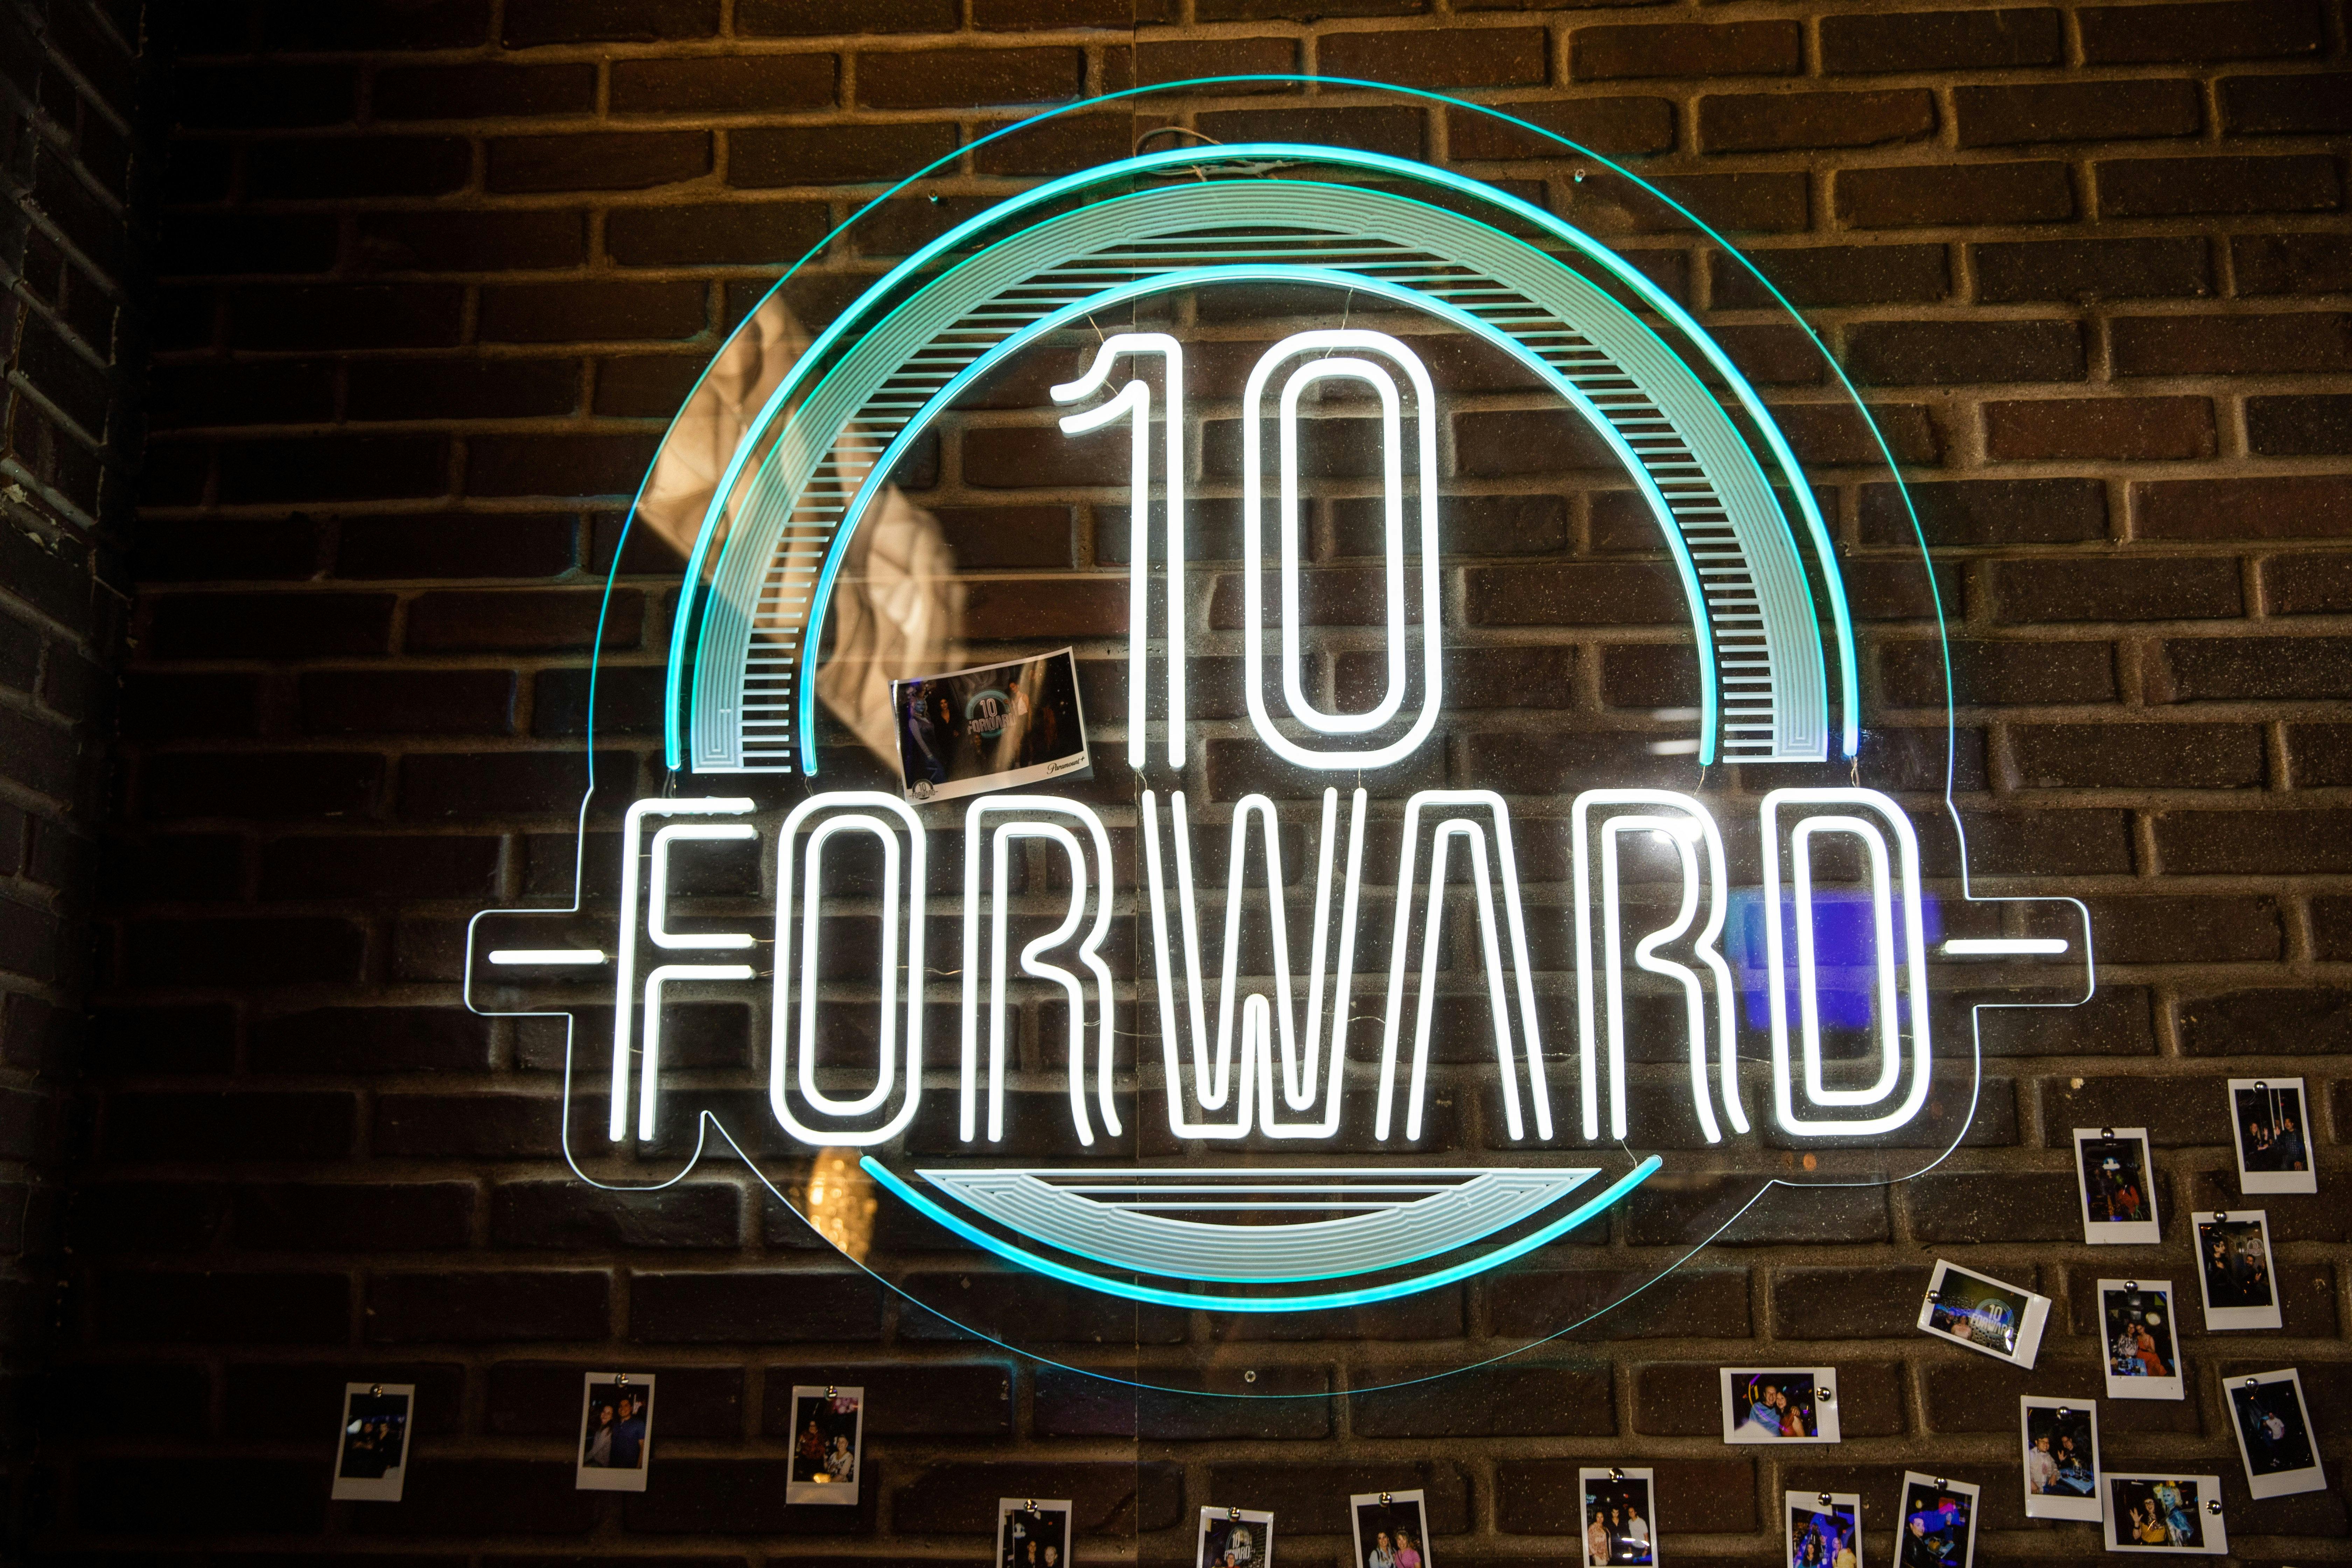 The 10-Forward sign in the bar.